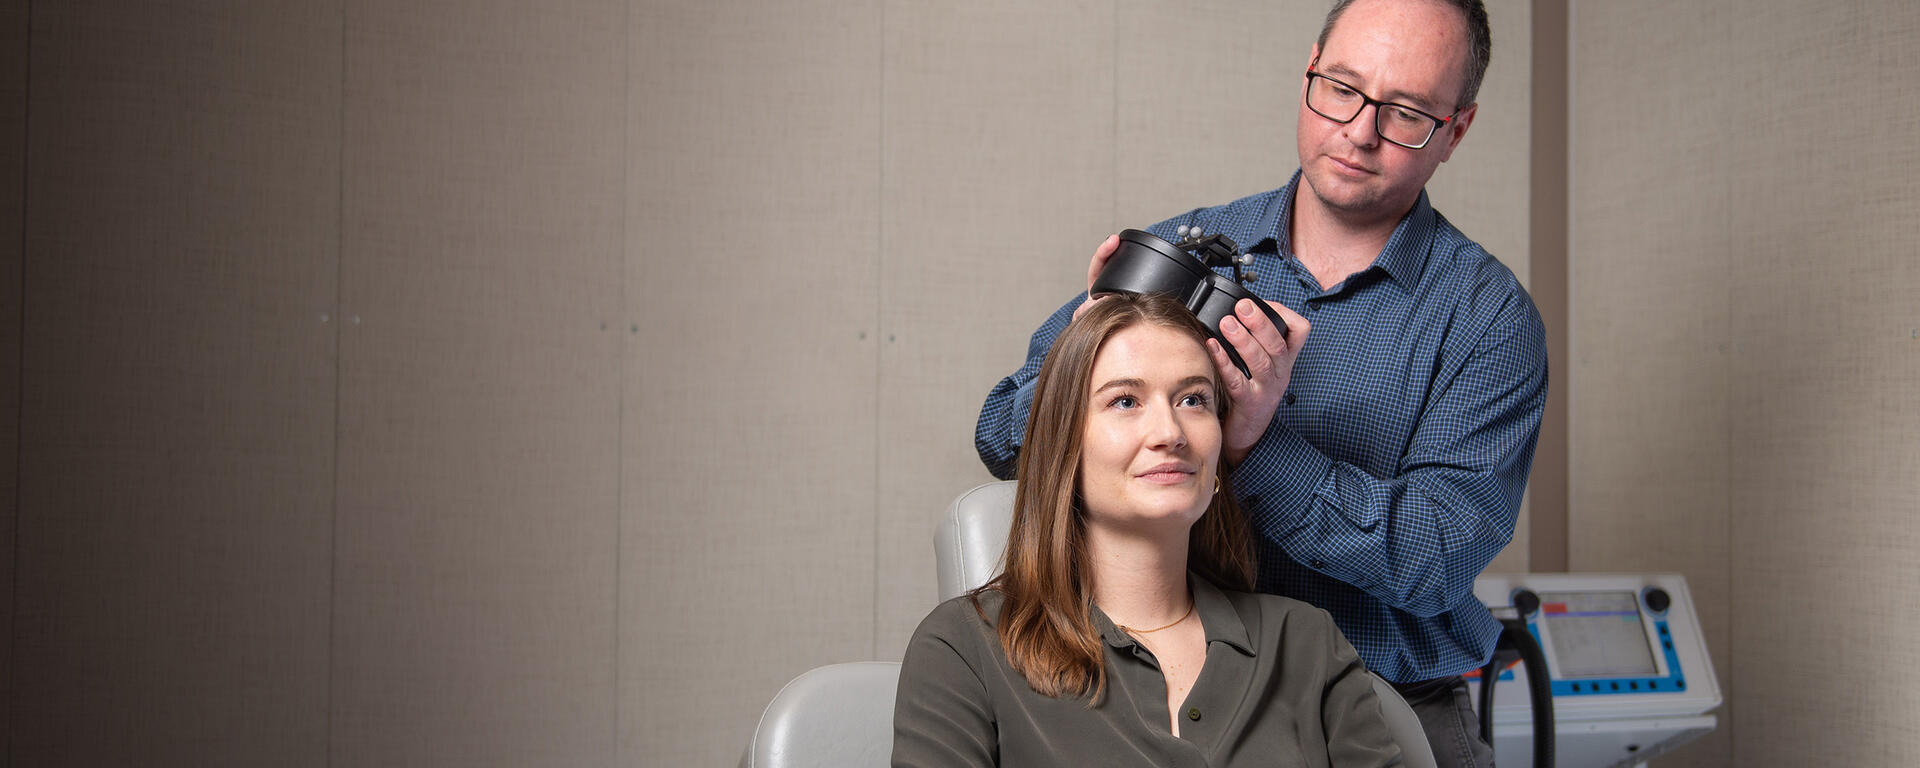 Dr. Alex McGirr demonstrates transcranial magnetic stimulation (TMS) on his graduate student, Jaeden Cole. McGirr is holding a small black device up against Jaeden's head.